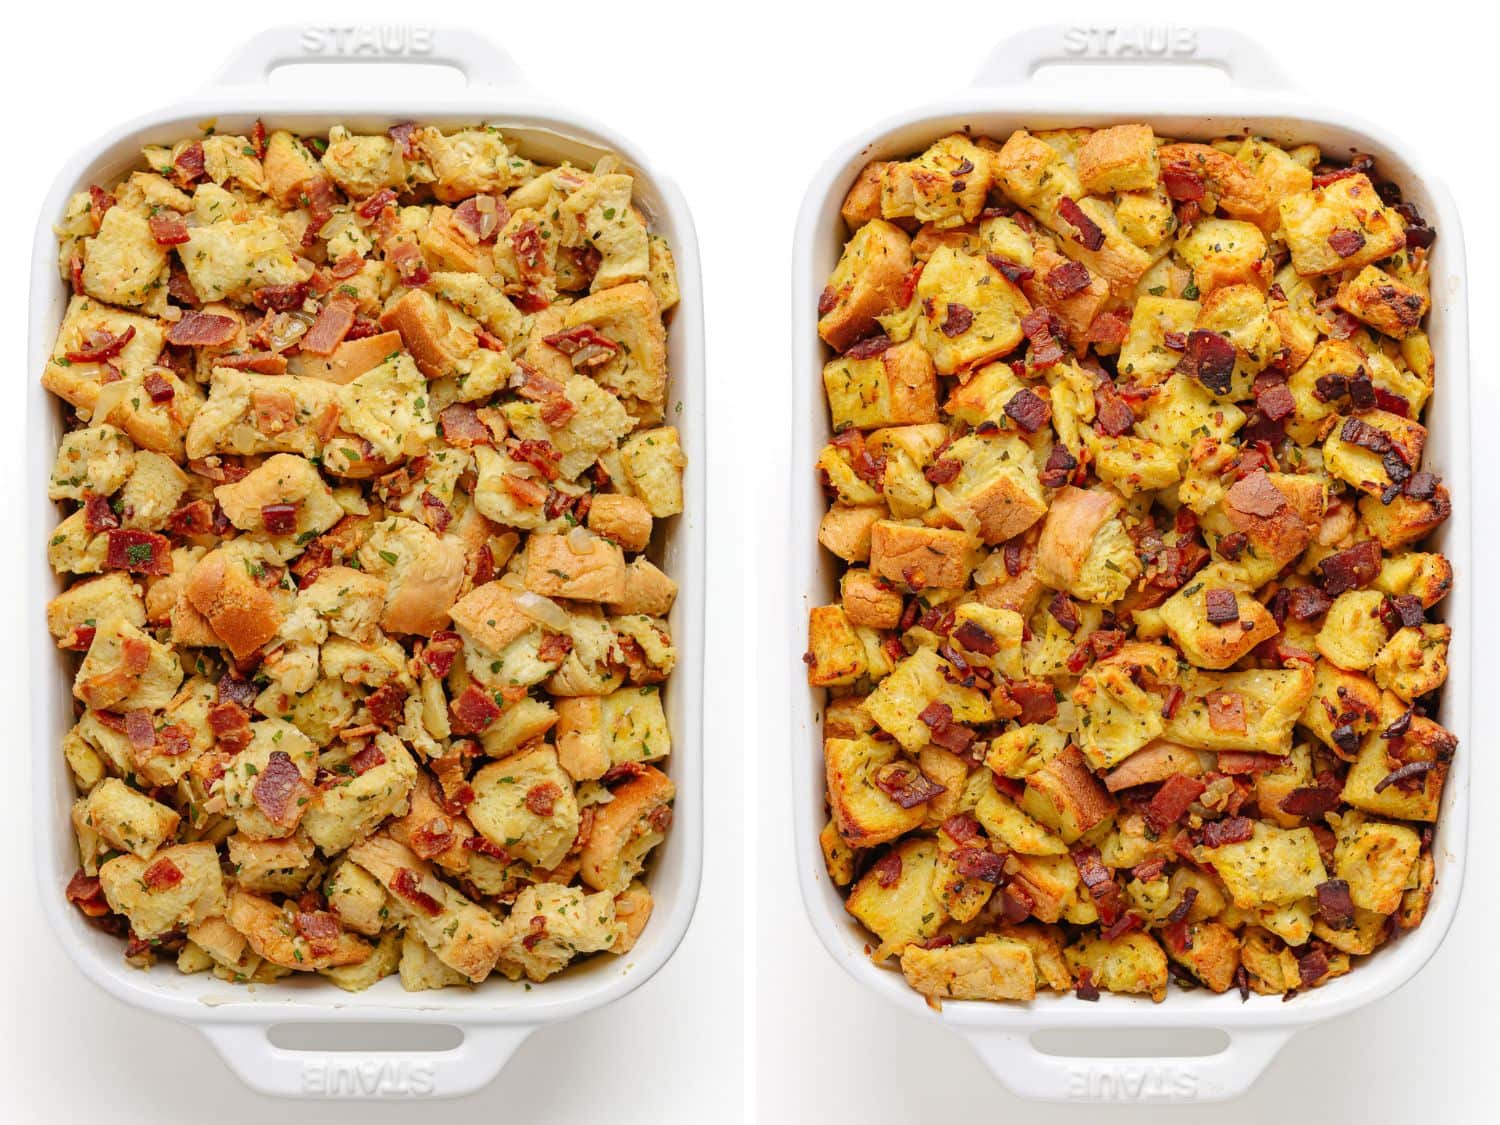 Photo collage showing casserole dish of stuffing before and after being baked.